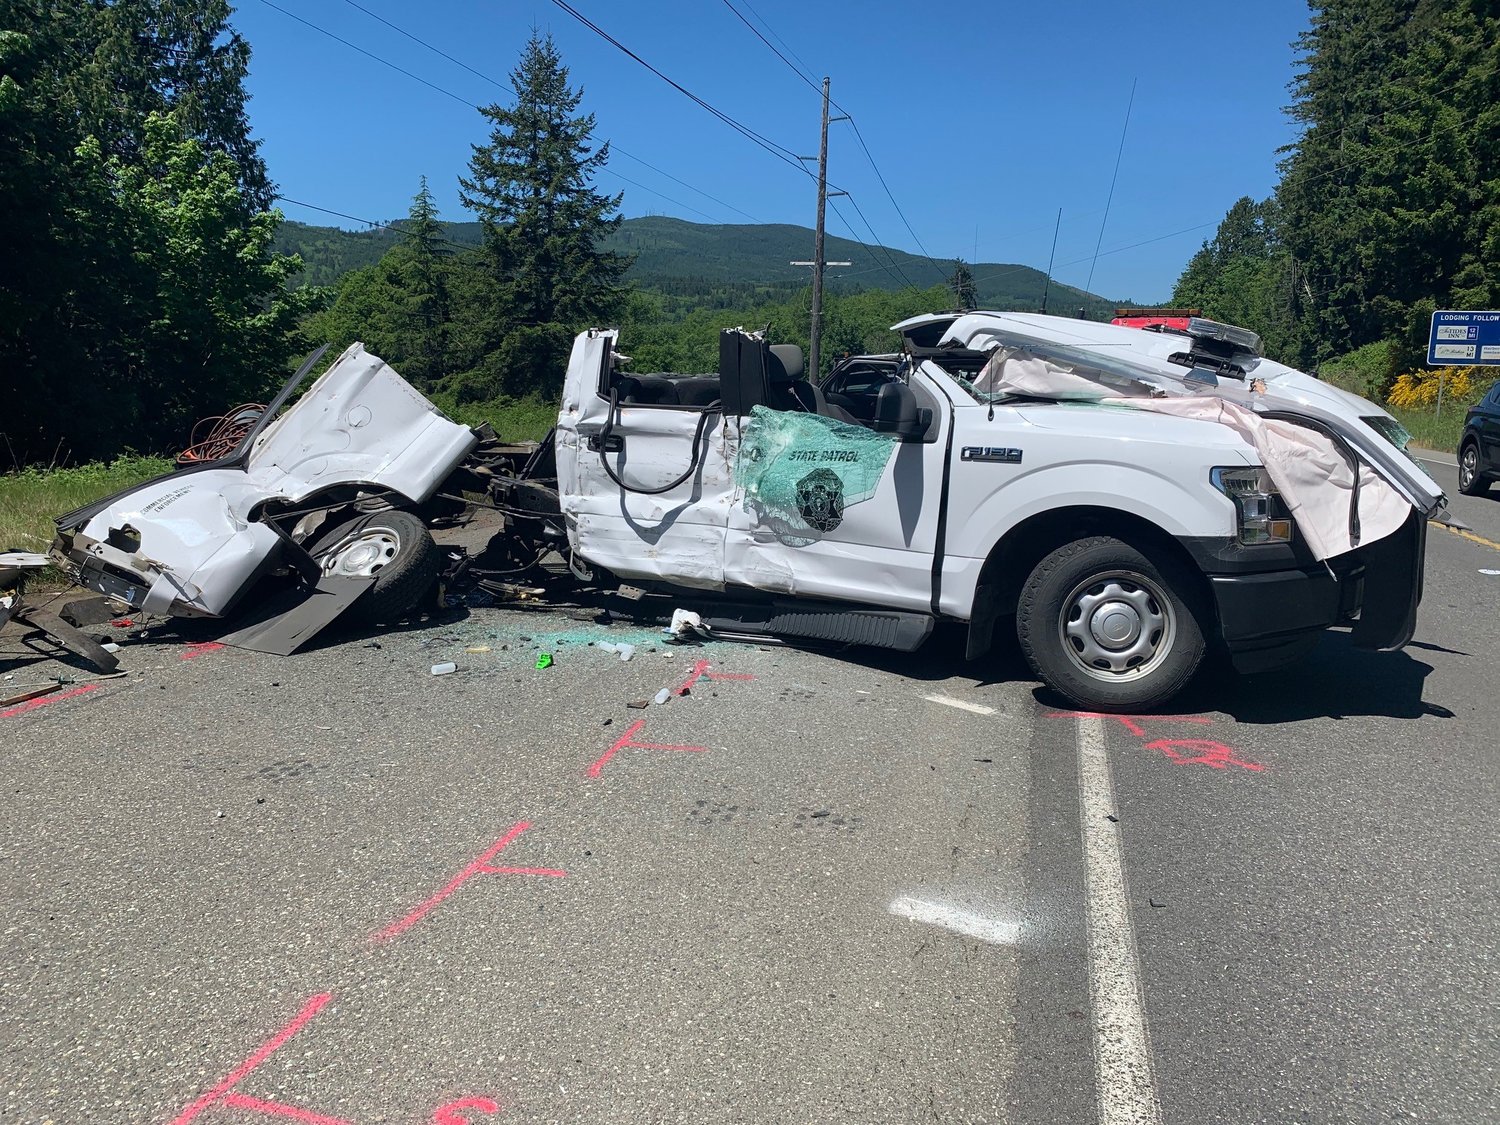 A Washington State Patrol Ford F150 was cut in two during a crash Tuesday morning on U.S. Highway 101 south of Discovery Bay. The officer in the patrol vehicle was airlifted to Harborview Medical Center with serious injuries.